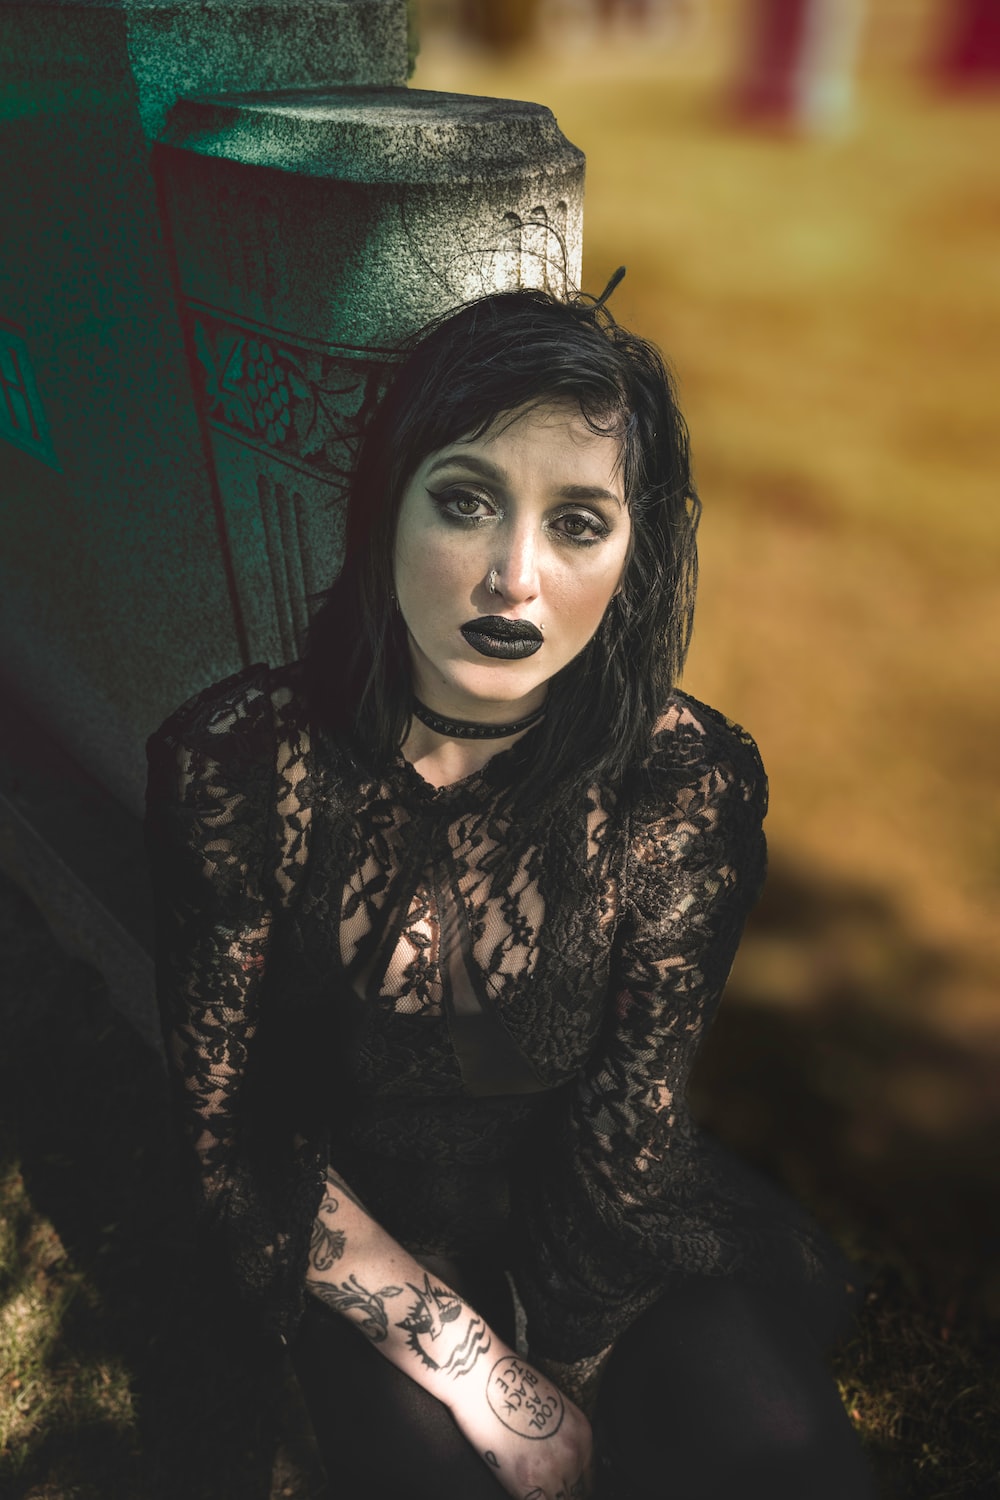 Gothic Woman Picture. Download Free Image